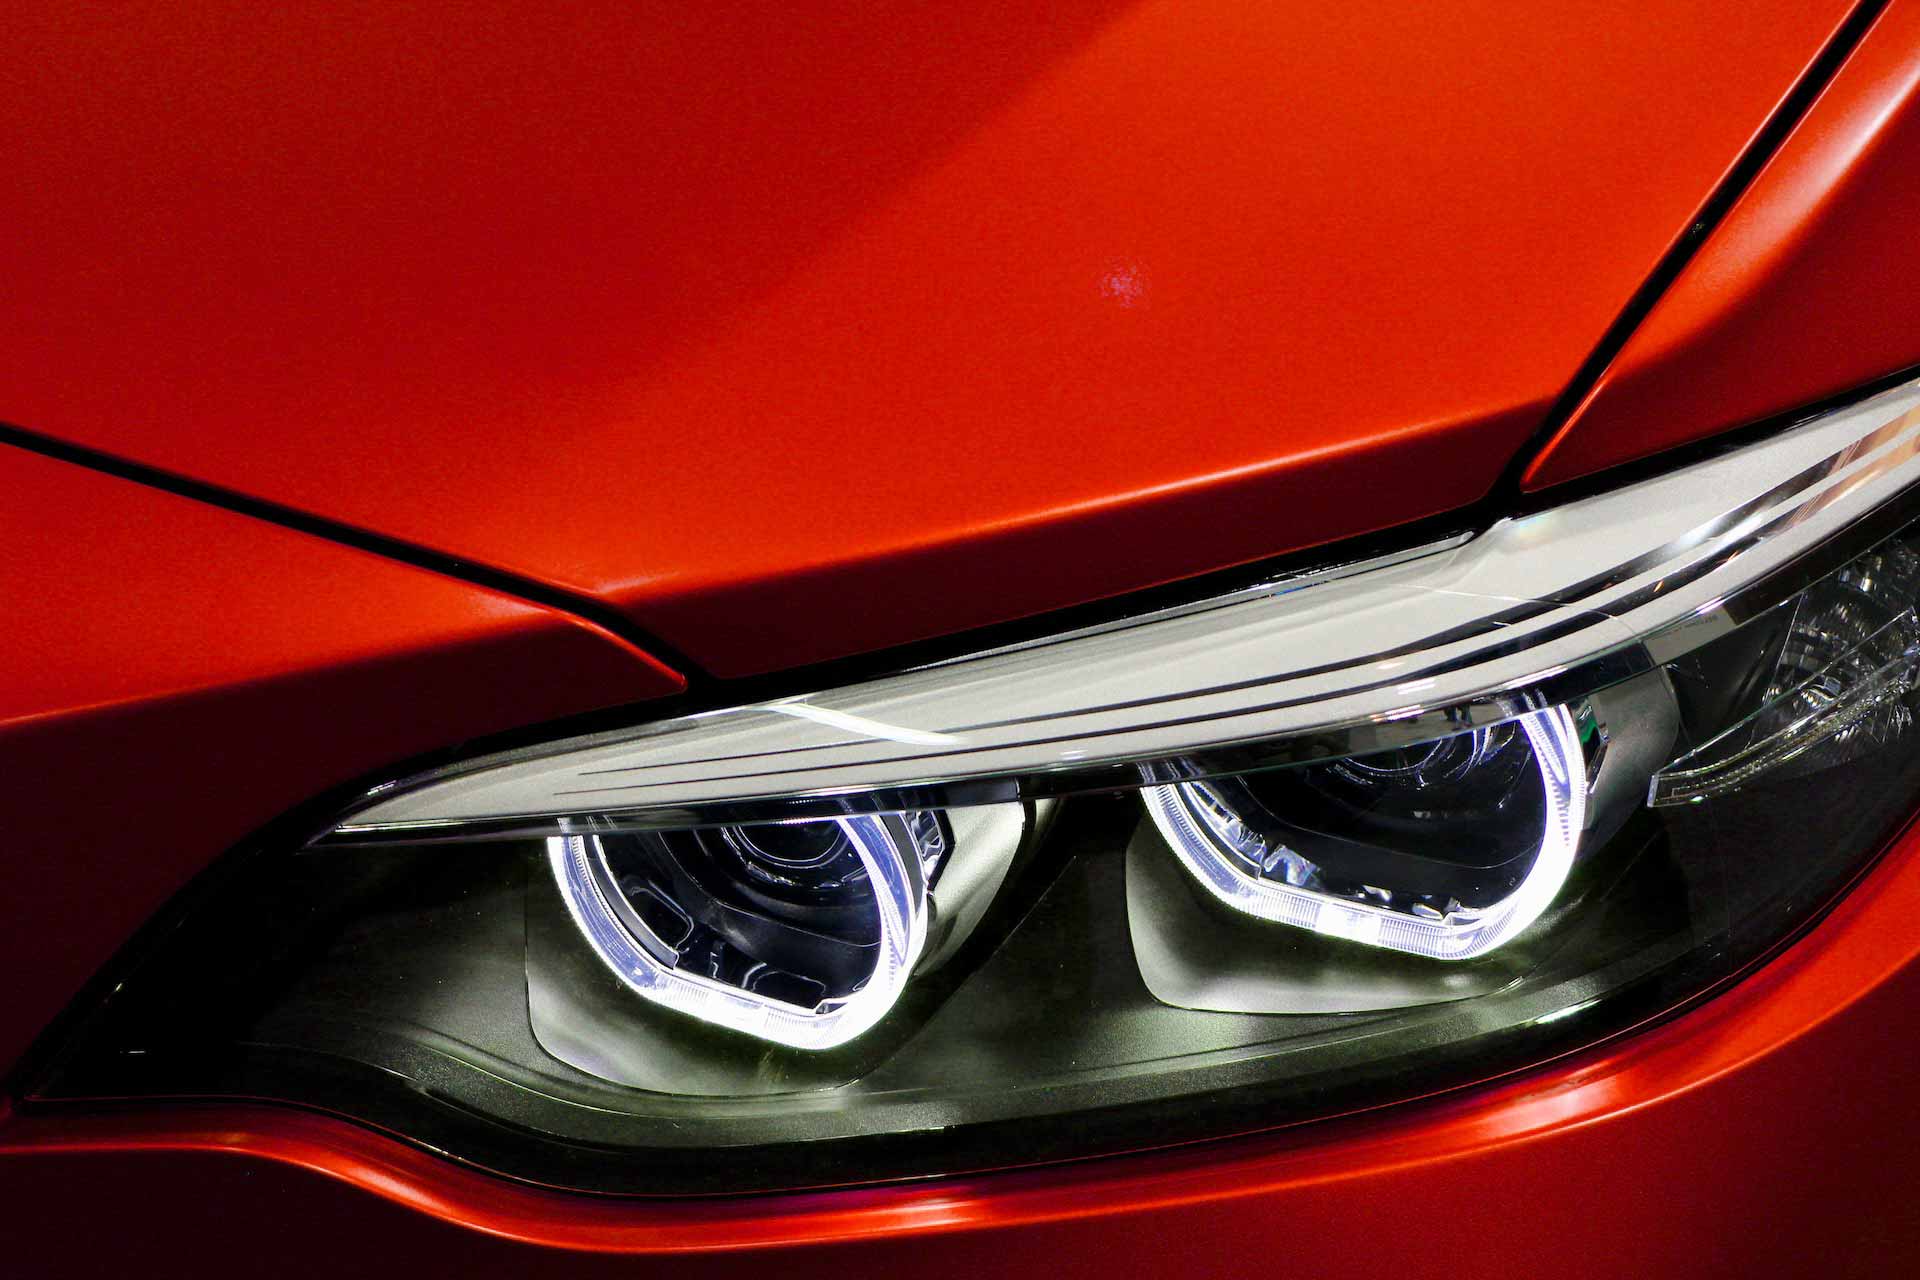 Close up on LED headlights on red car